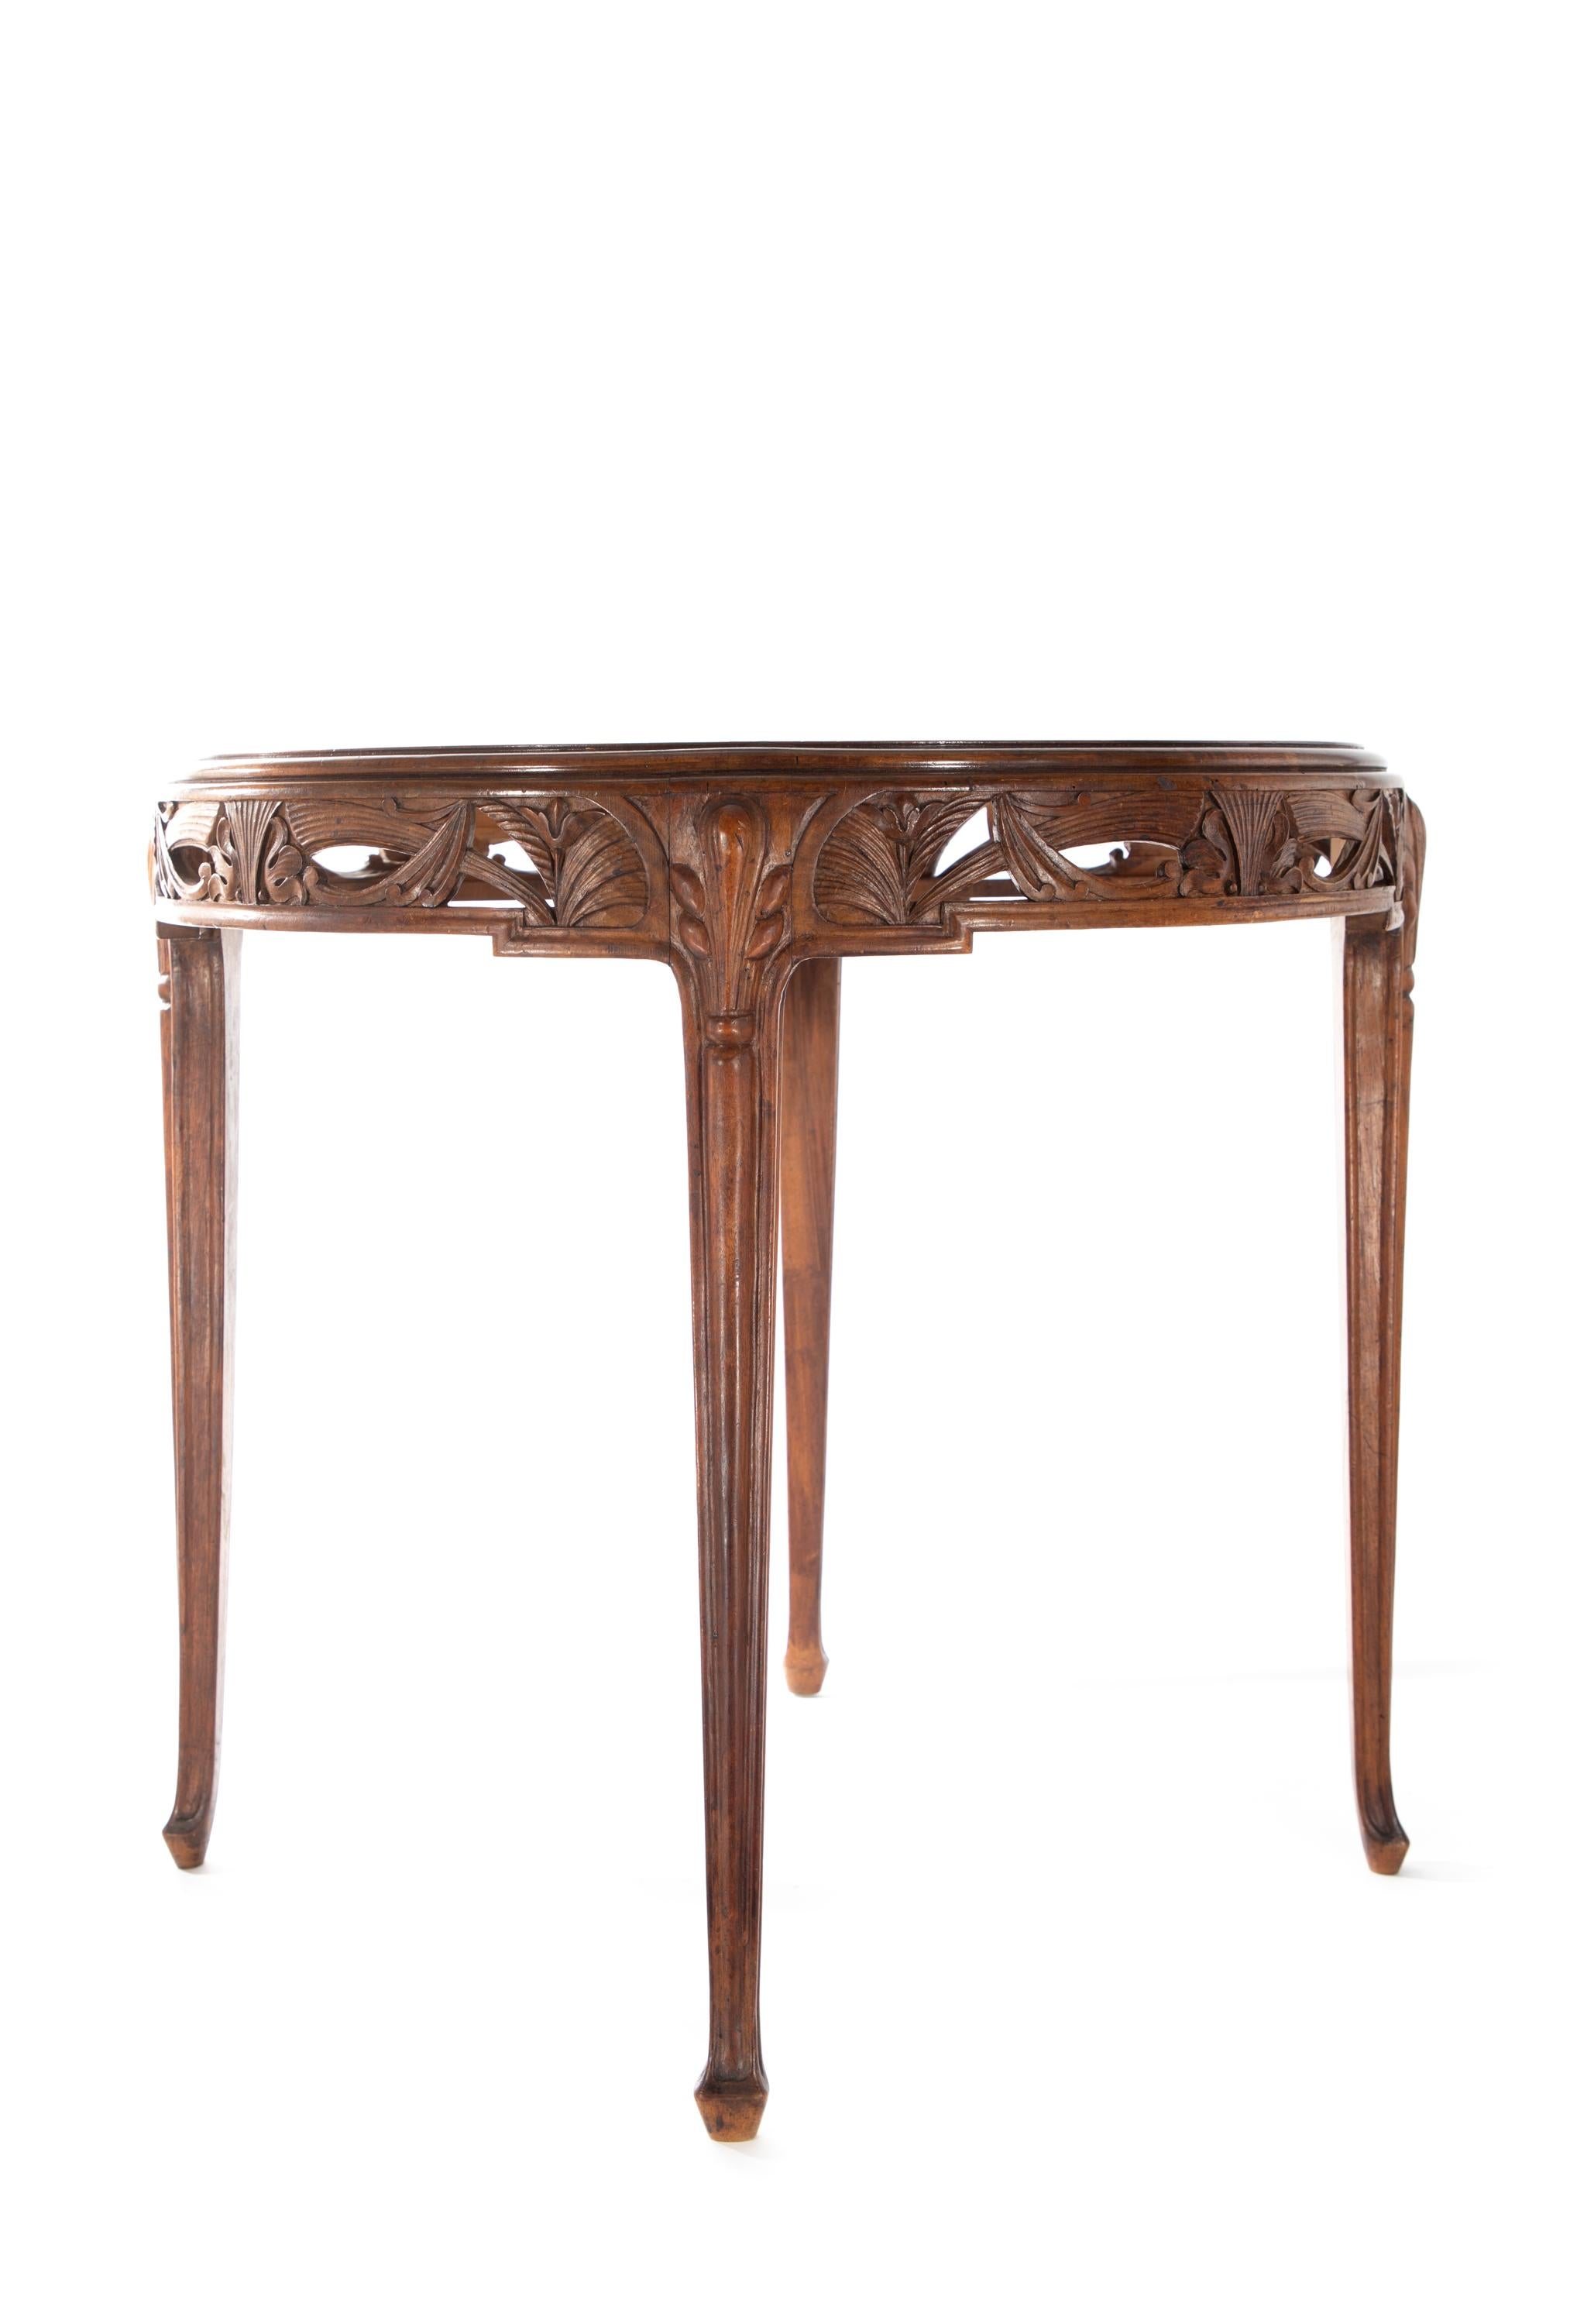 Wood Large Round Art Deco Style Table For Sale